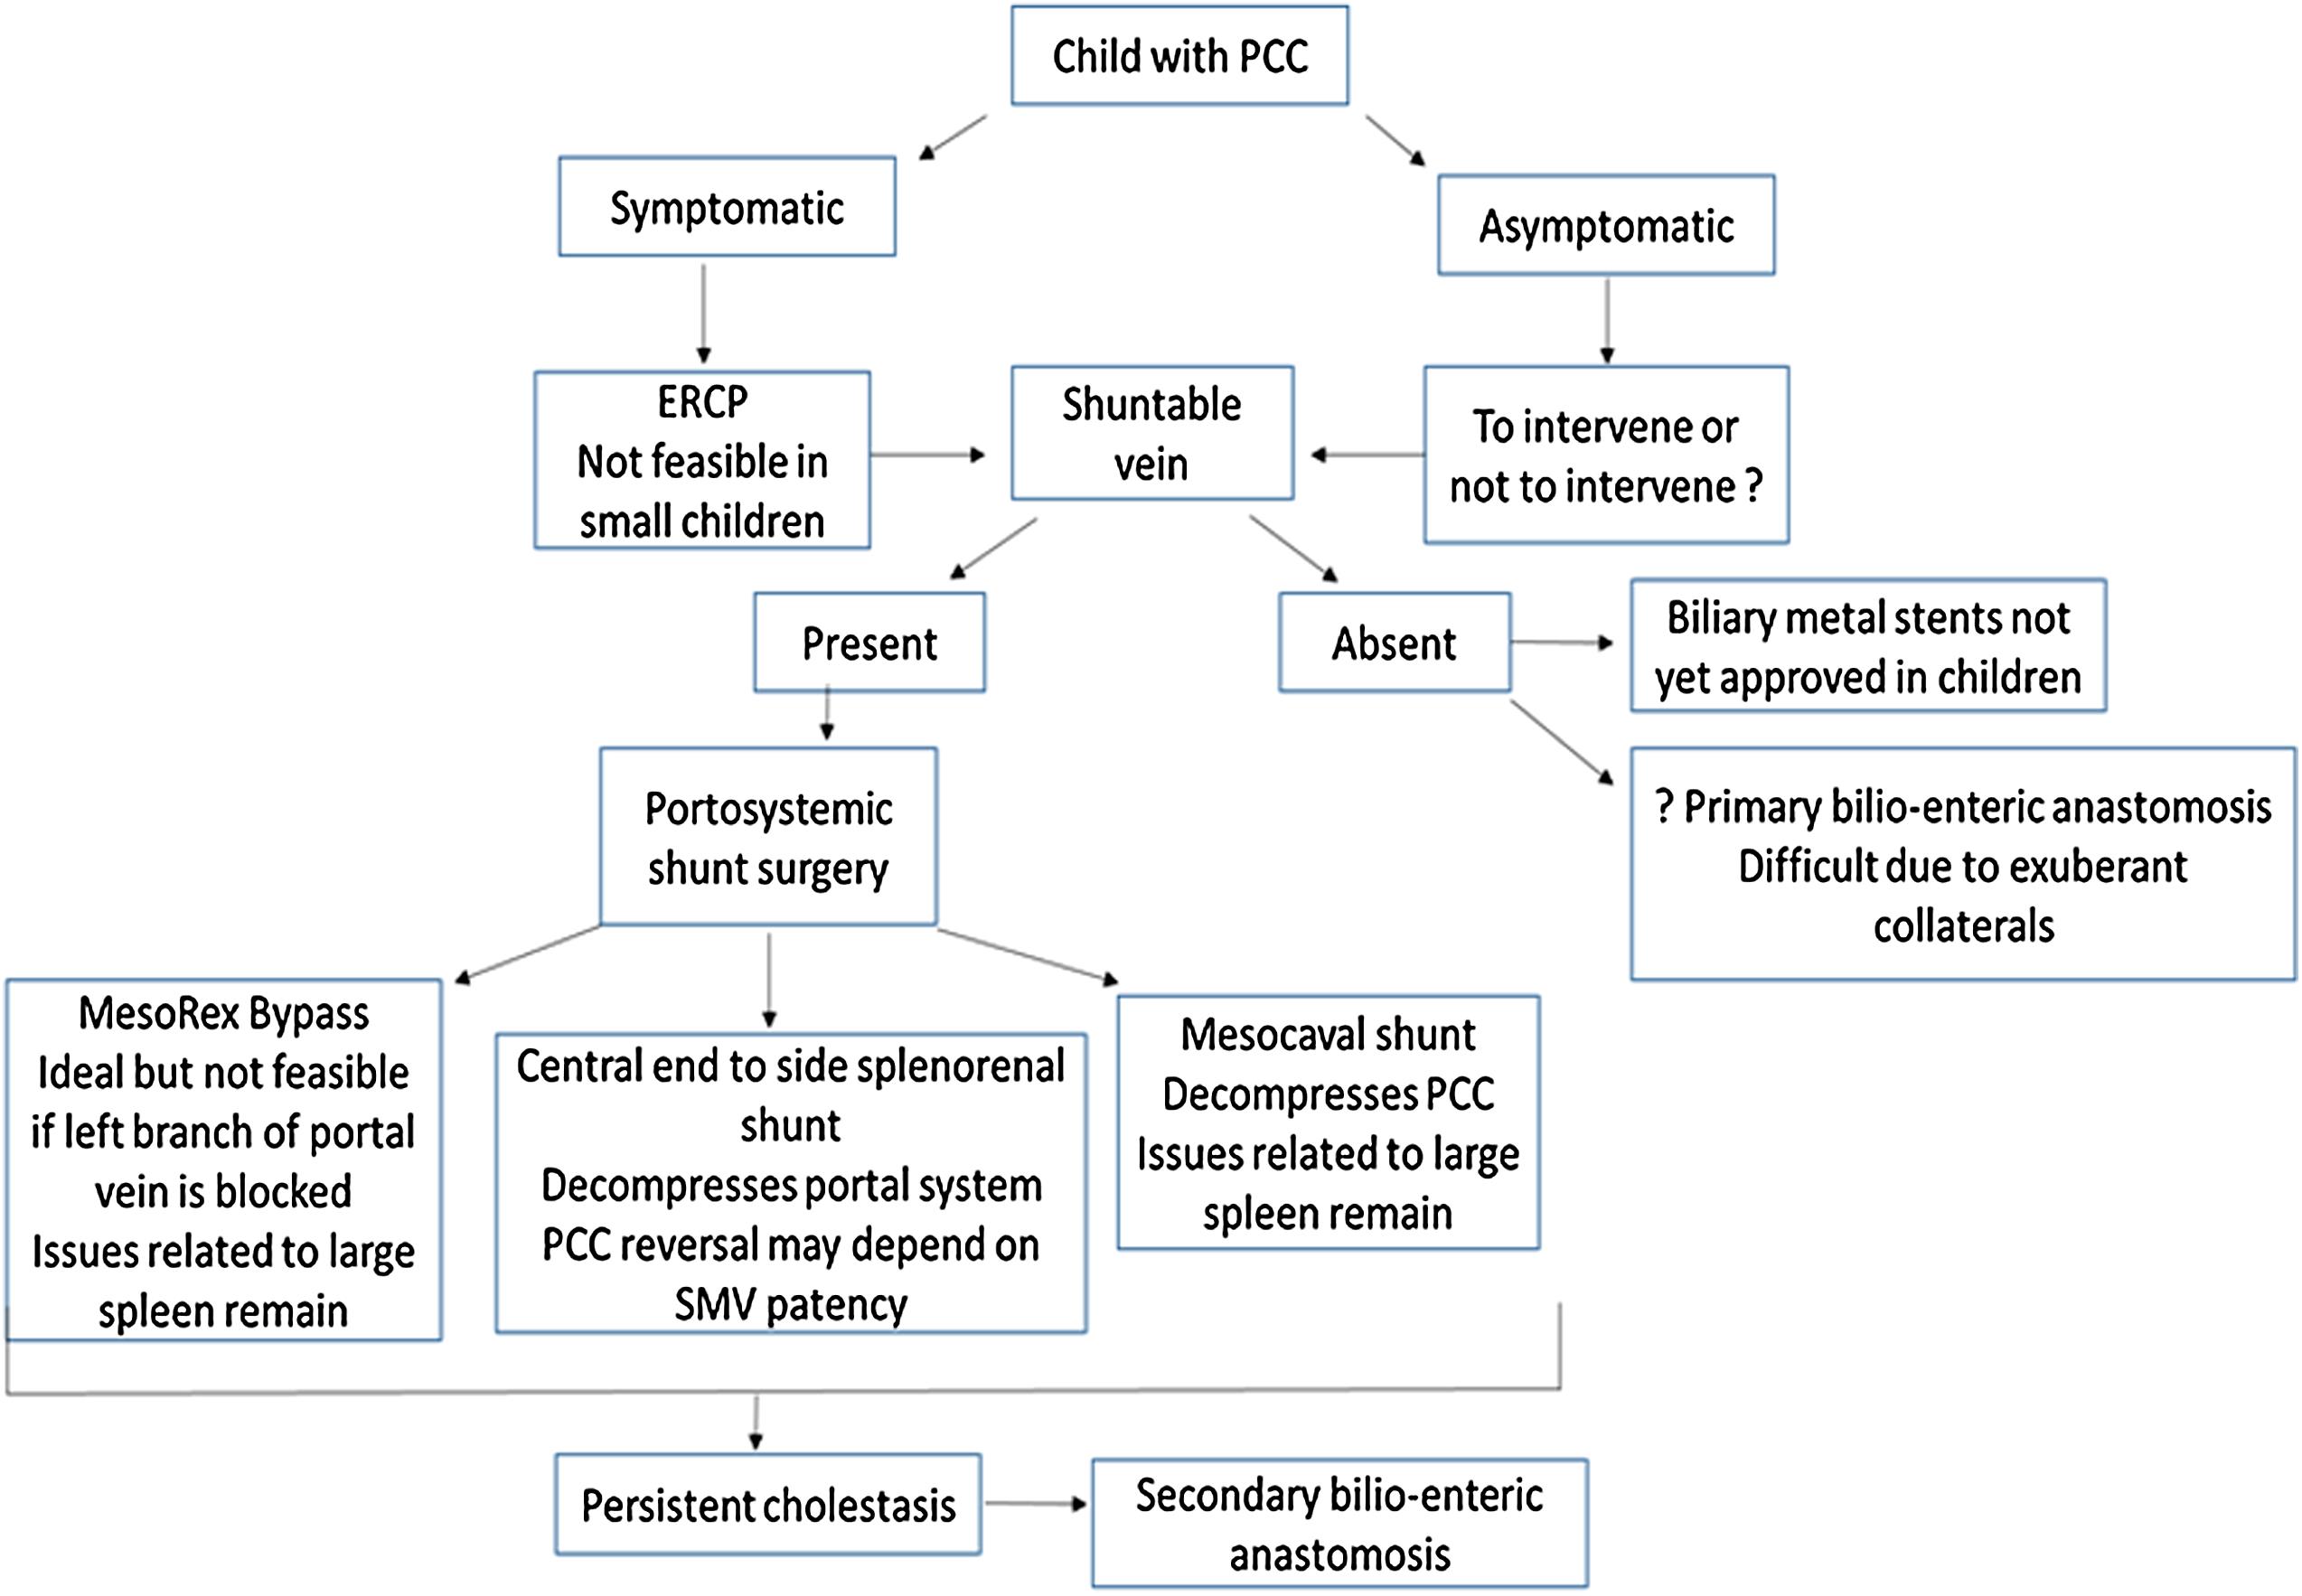 Summary of management dilemmas of portal cavernoma cholangiopathy in children.